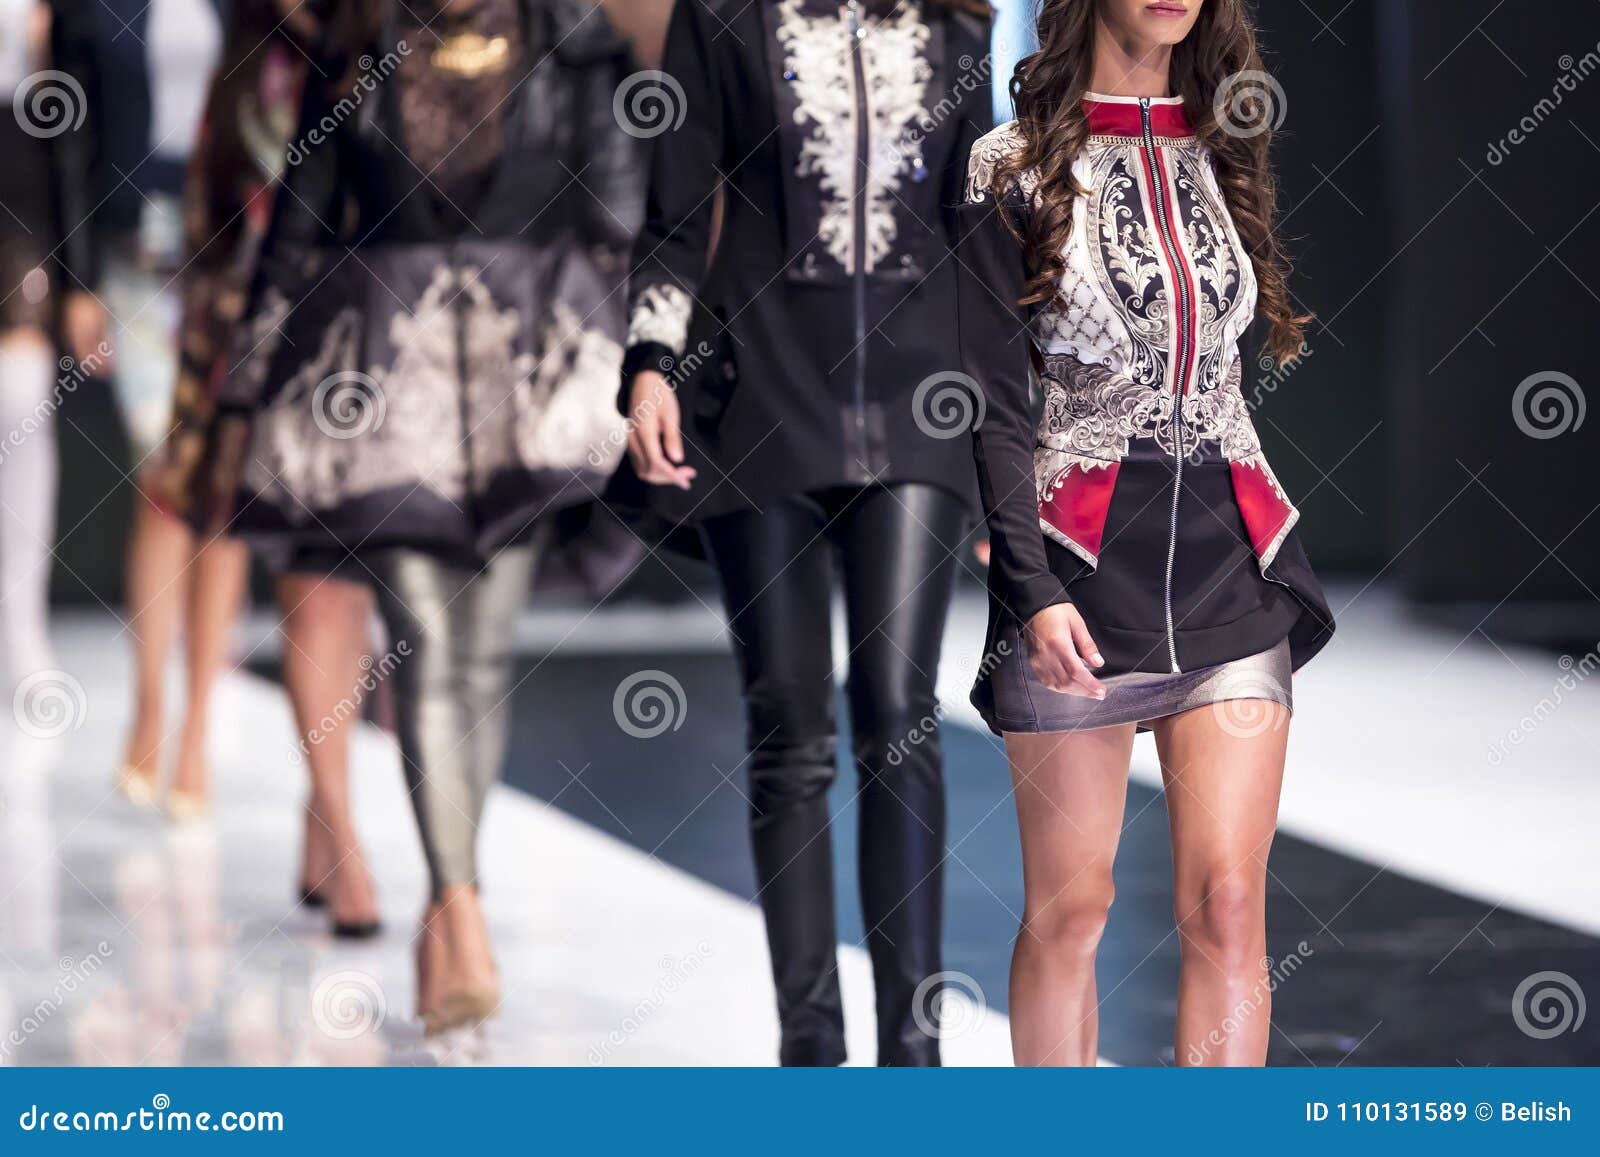 Hej For pokker reagere 121,248 Fashion Catwalk Photos - Free & Royalty-Free Stock Photos from  Dreamstime